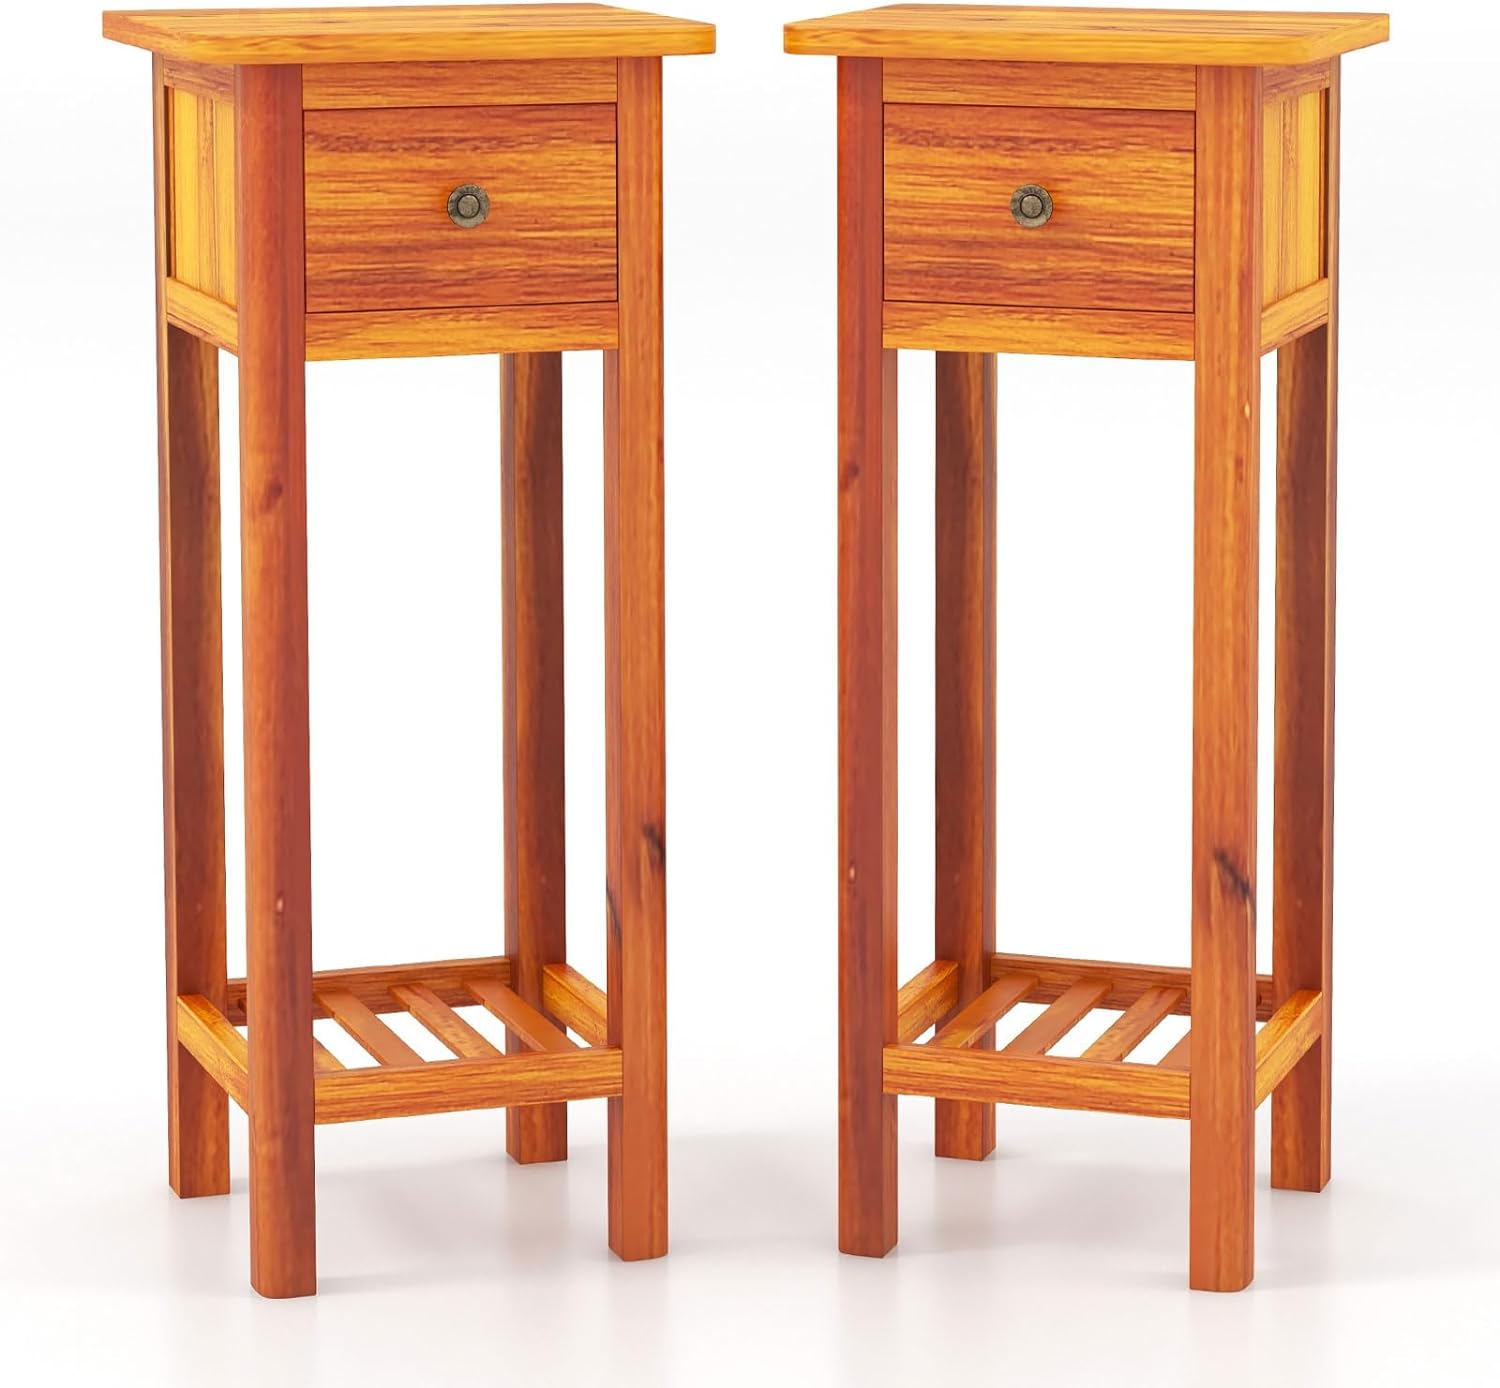 Giantex Narrow End Table with Drawer, Tall Acacia Wood Side Table with Bottom Shelf, Modern Bedside Tables